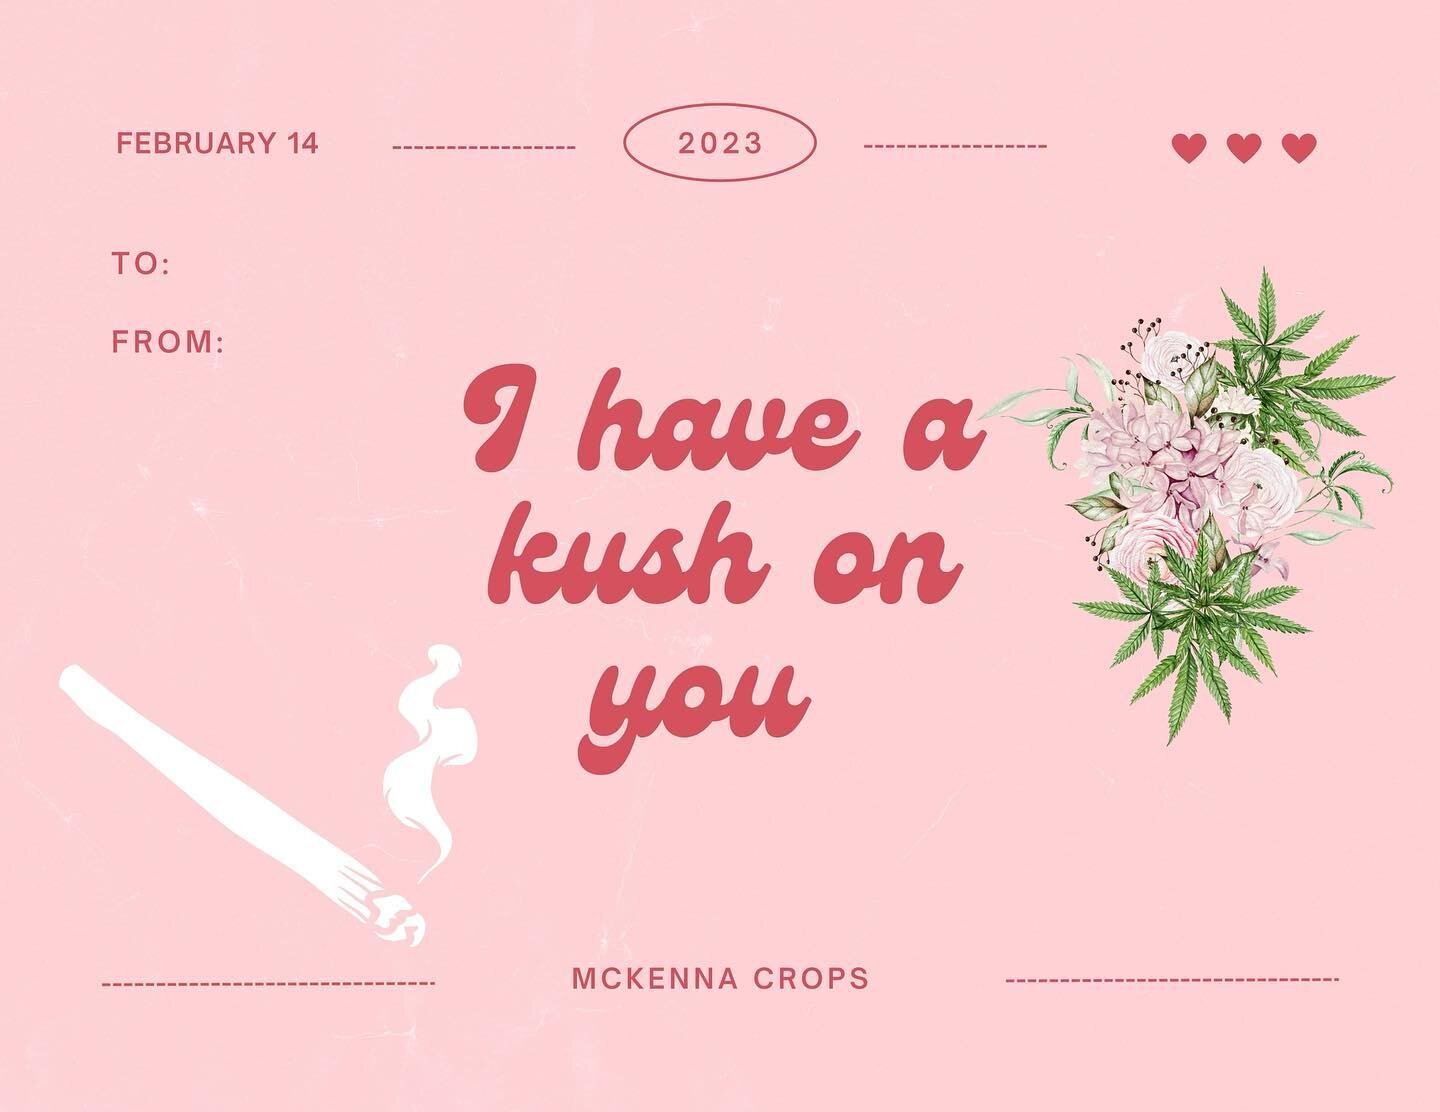 Happy Valentine&rsquo;s Day from your friends at McKenna Crops! Thanks for being our best buds. 🫶